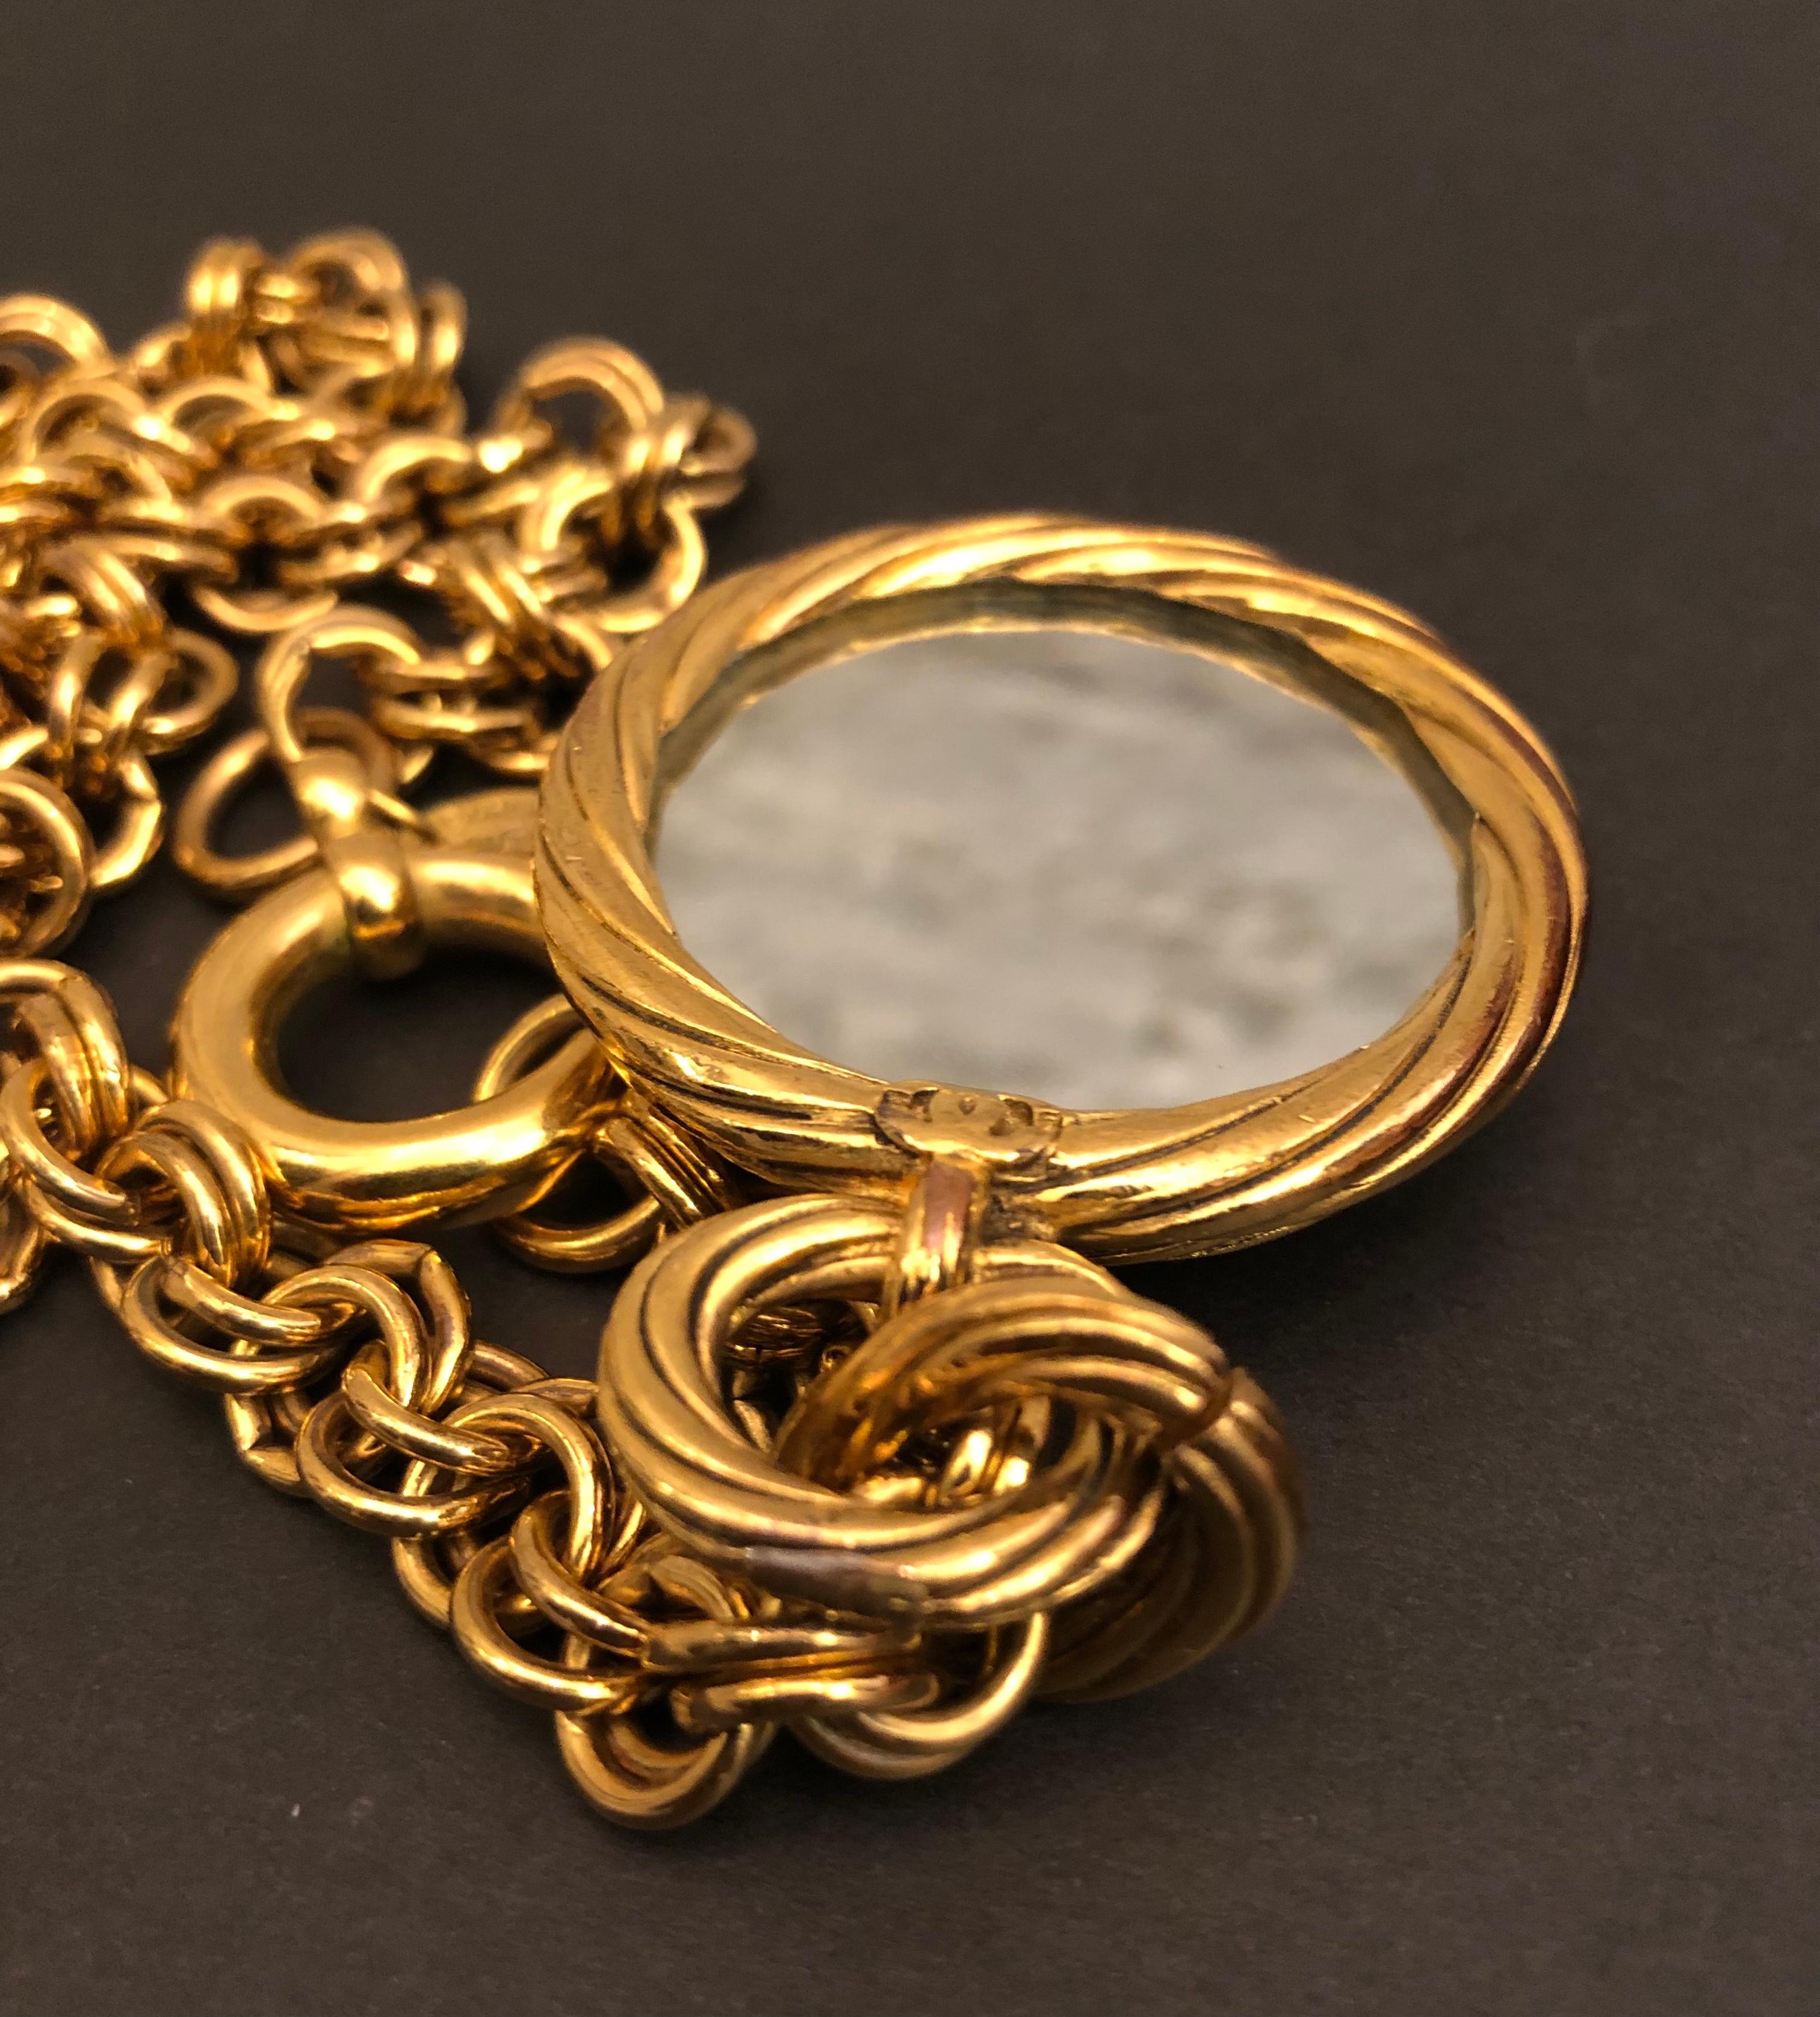 1993 Vintage CHANEL Gold Toned Chain Mirror Necklace For Sale 4